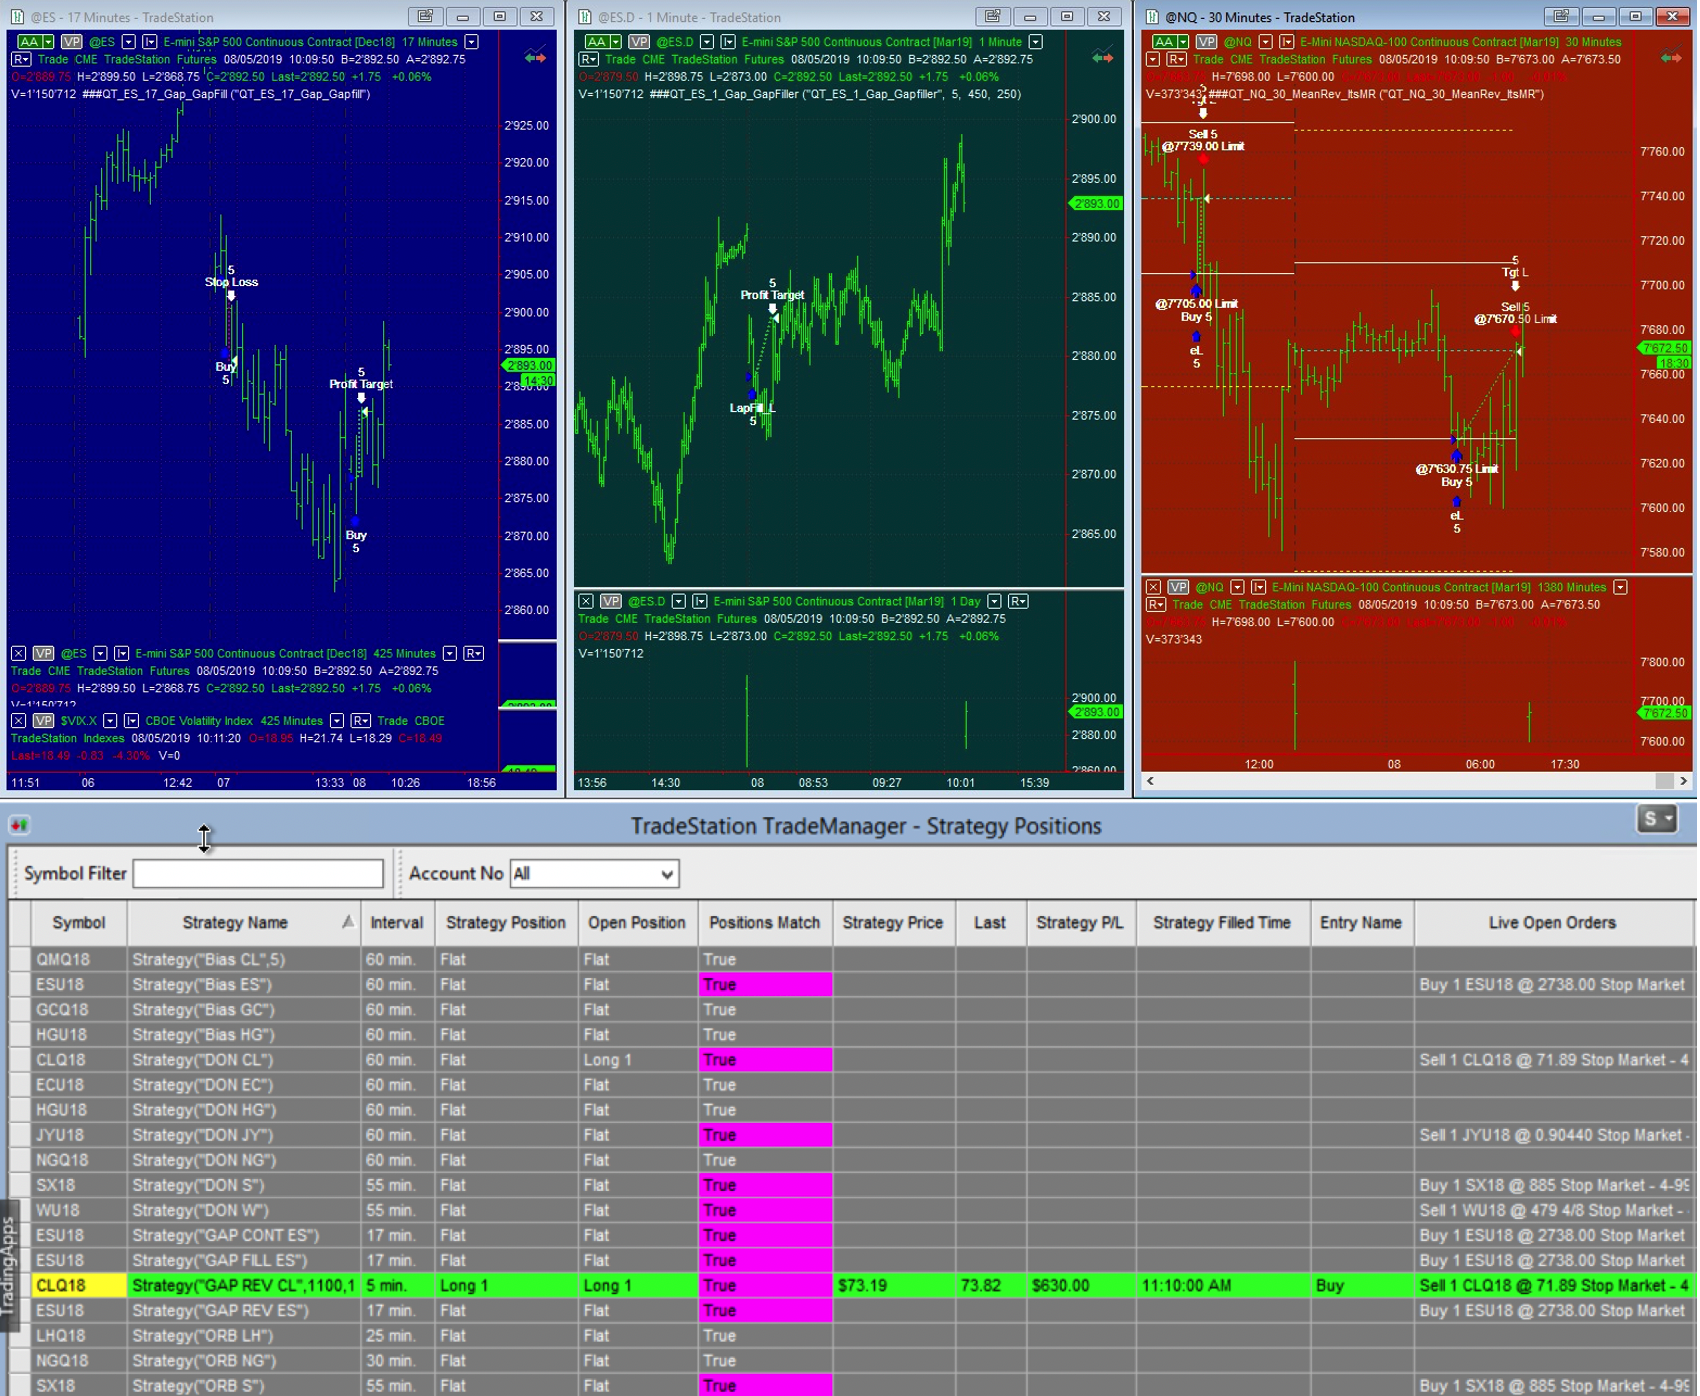 analisi strategie corso intraday trading system: strategie trading intraday, trading automatico, intraday trading futures 